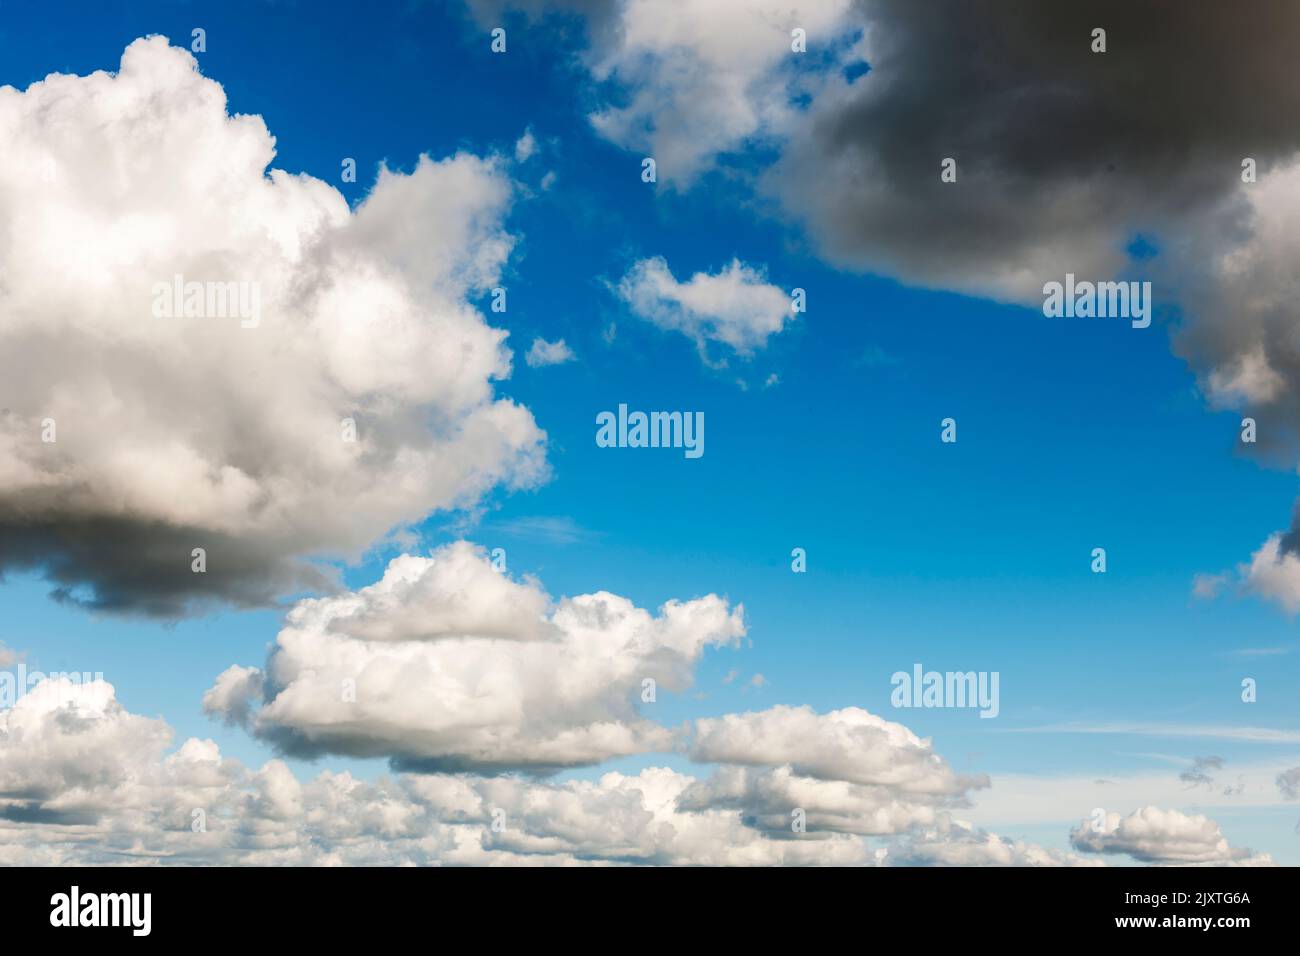 Full-frame landscape view of dark clouds in the blue sky over Europe. Stock Photo